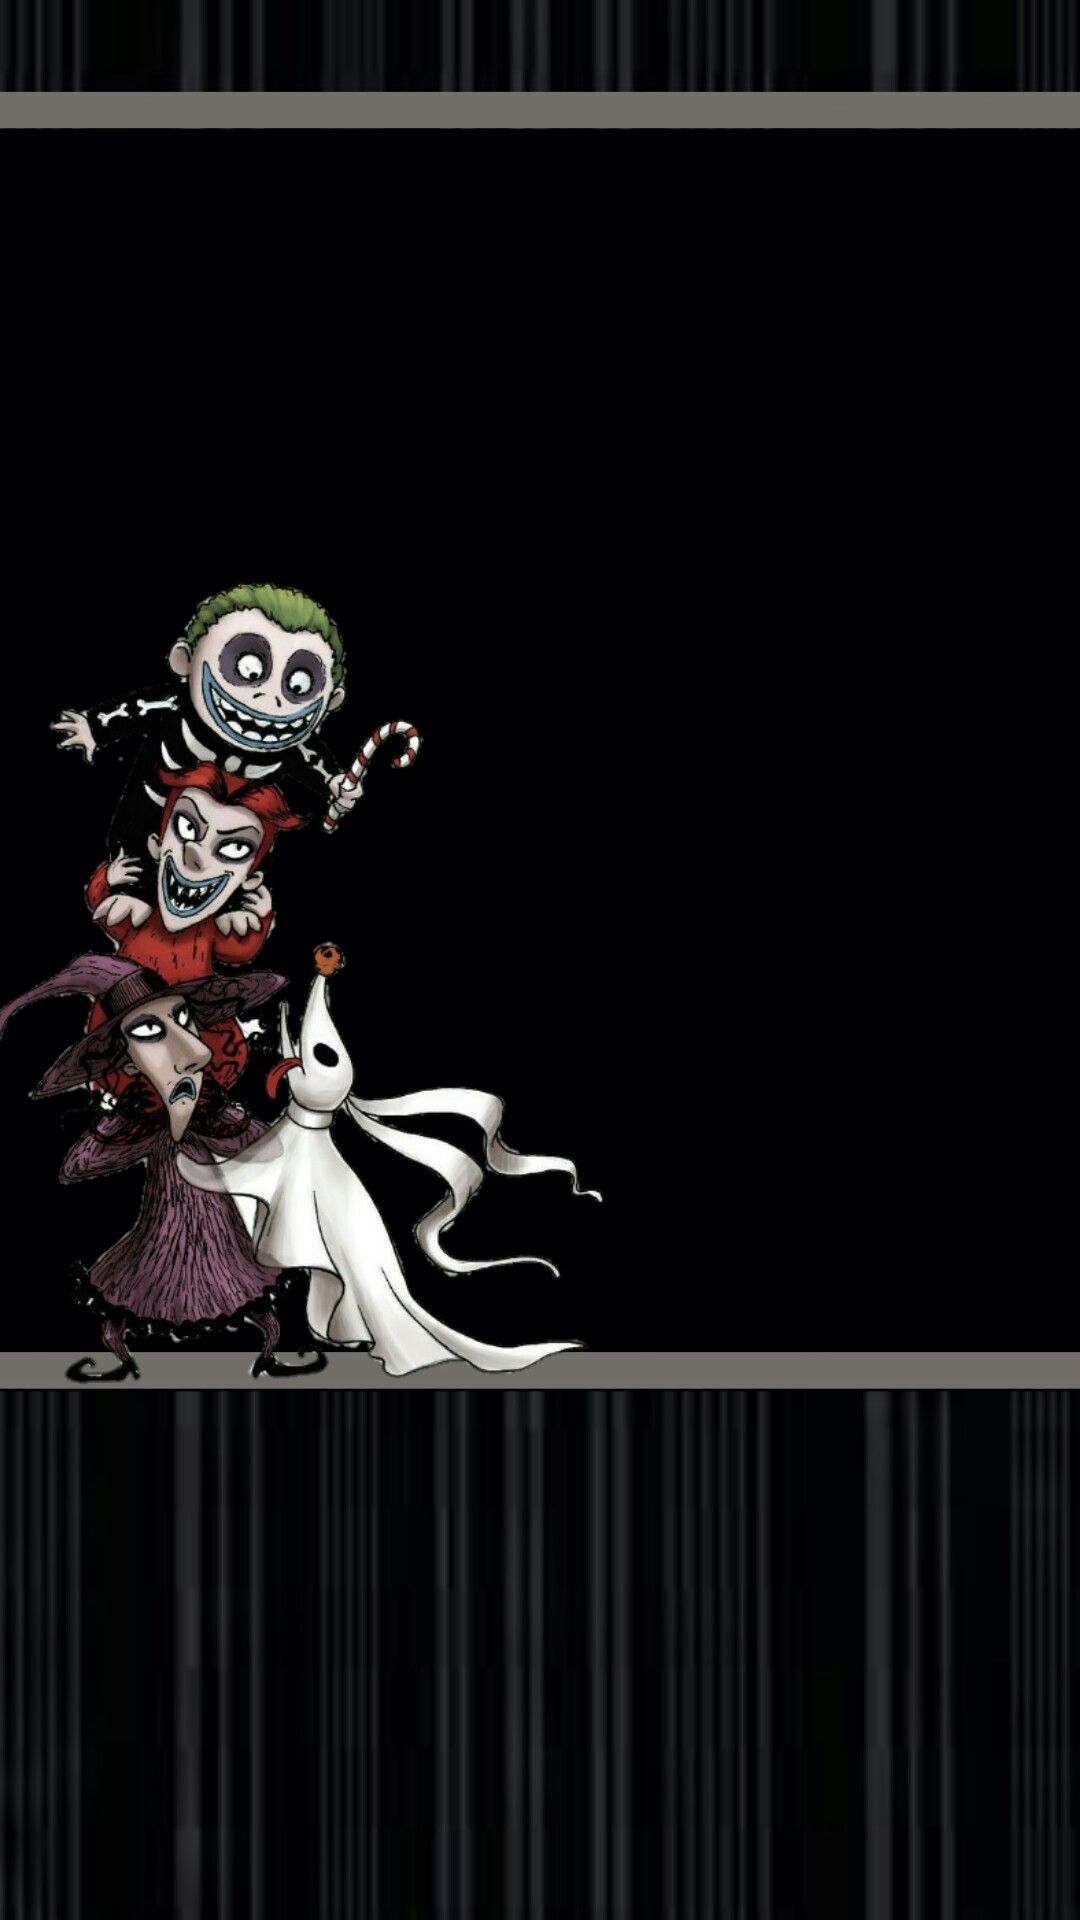 Jaque lock & barrel by me. Nightmare before christmas wallpaper, Wallpaper iphone christmas, Nightmare before christmas movie